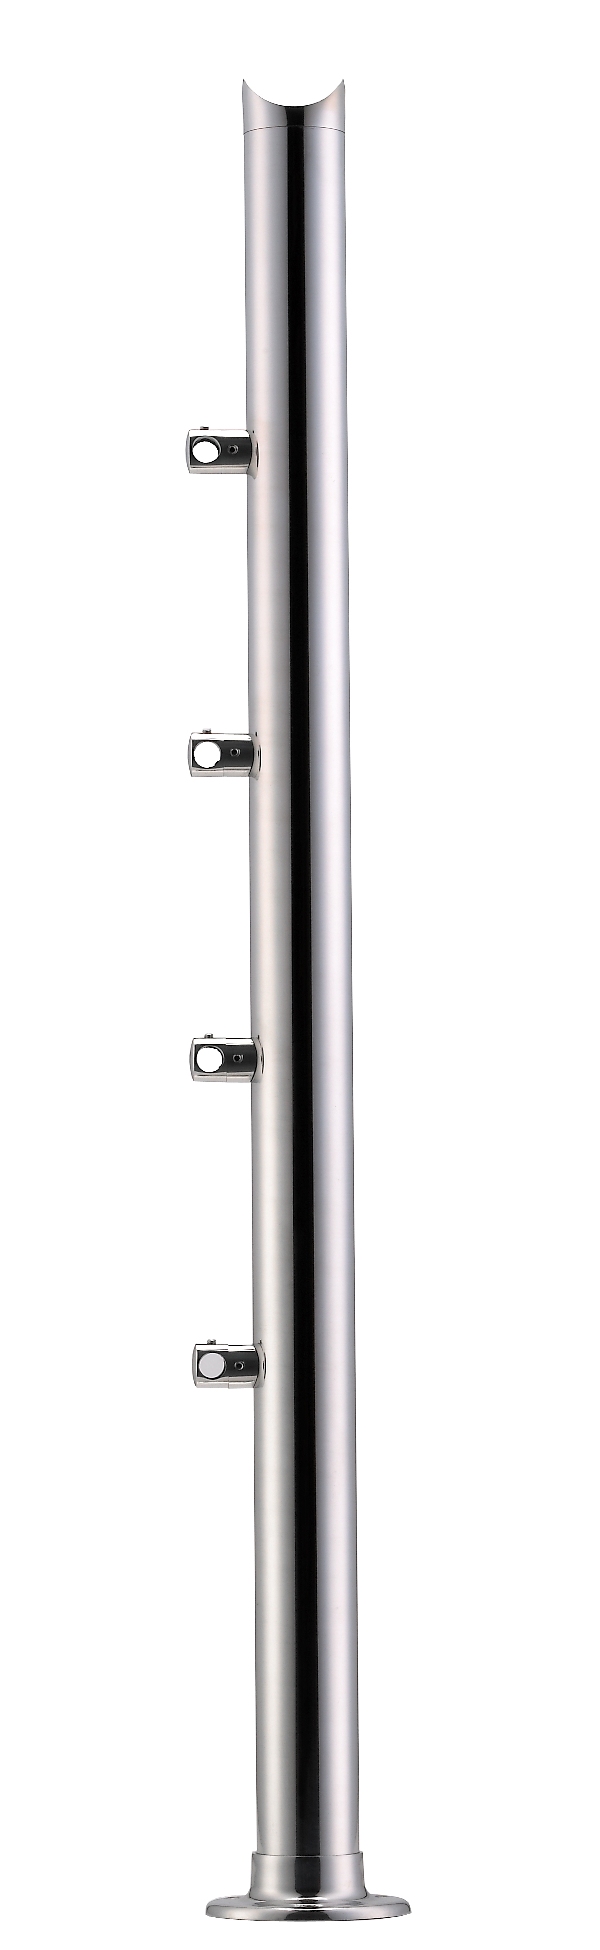 Stainless Steel Balustrade Posts - Tubular - SS:2020476A